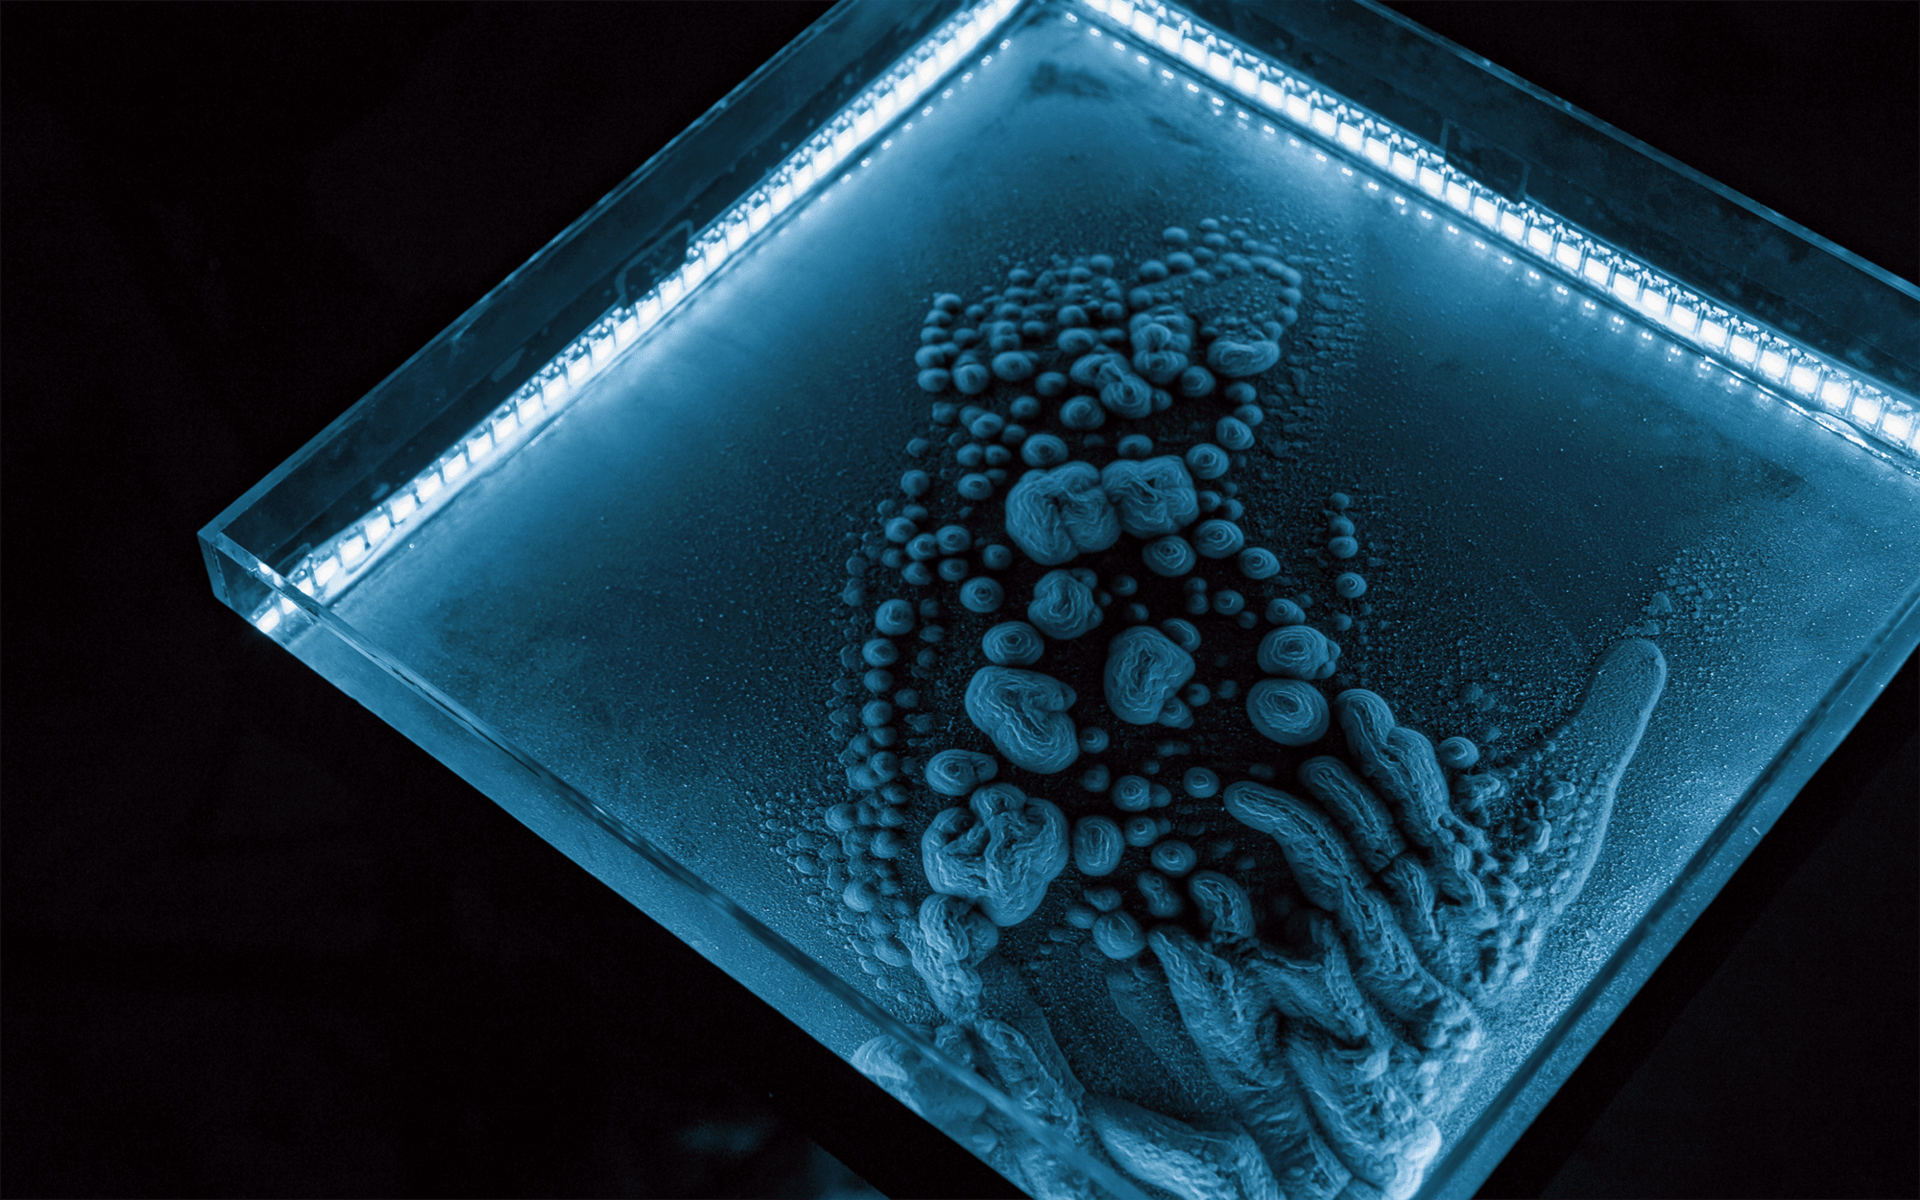 close view of some powder on a acrylic plate, with blue light around the installation